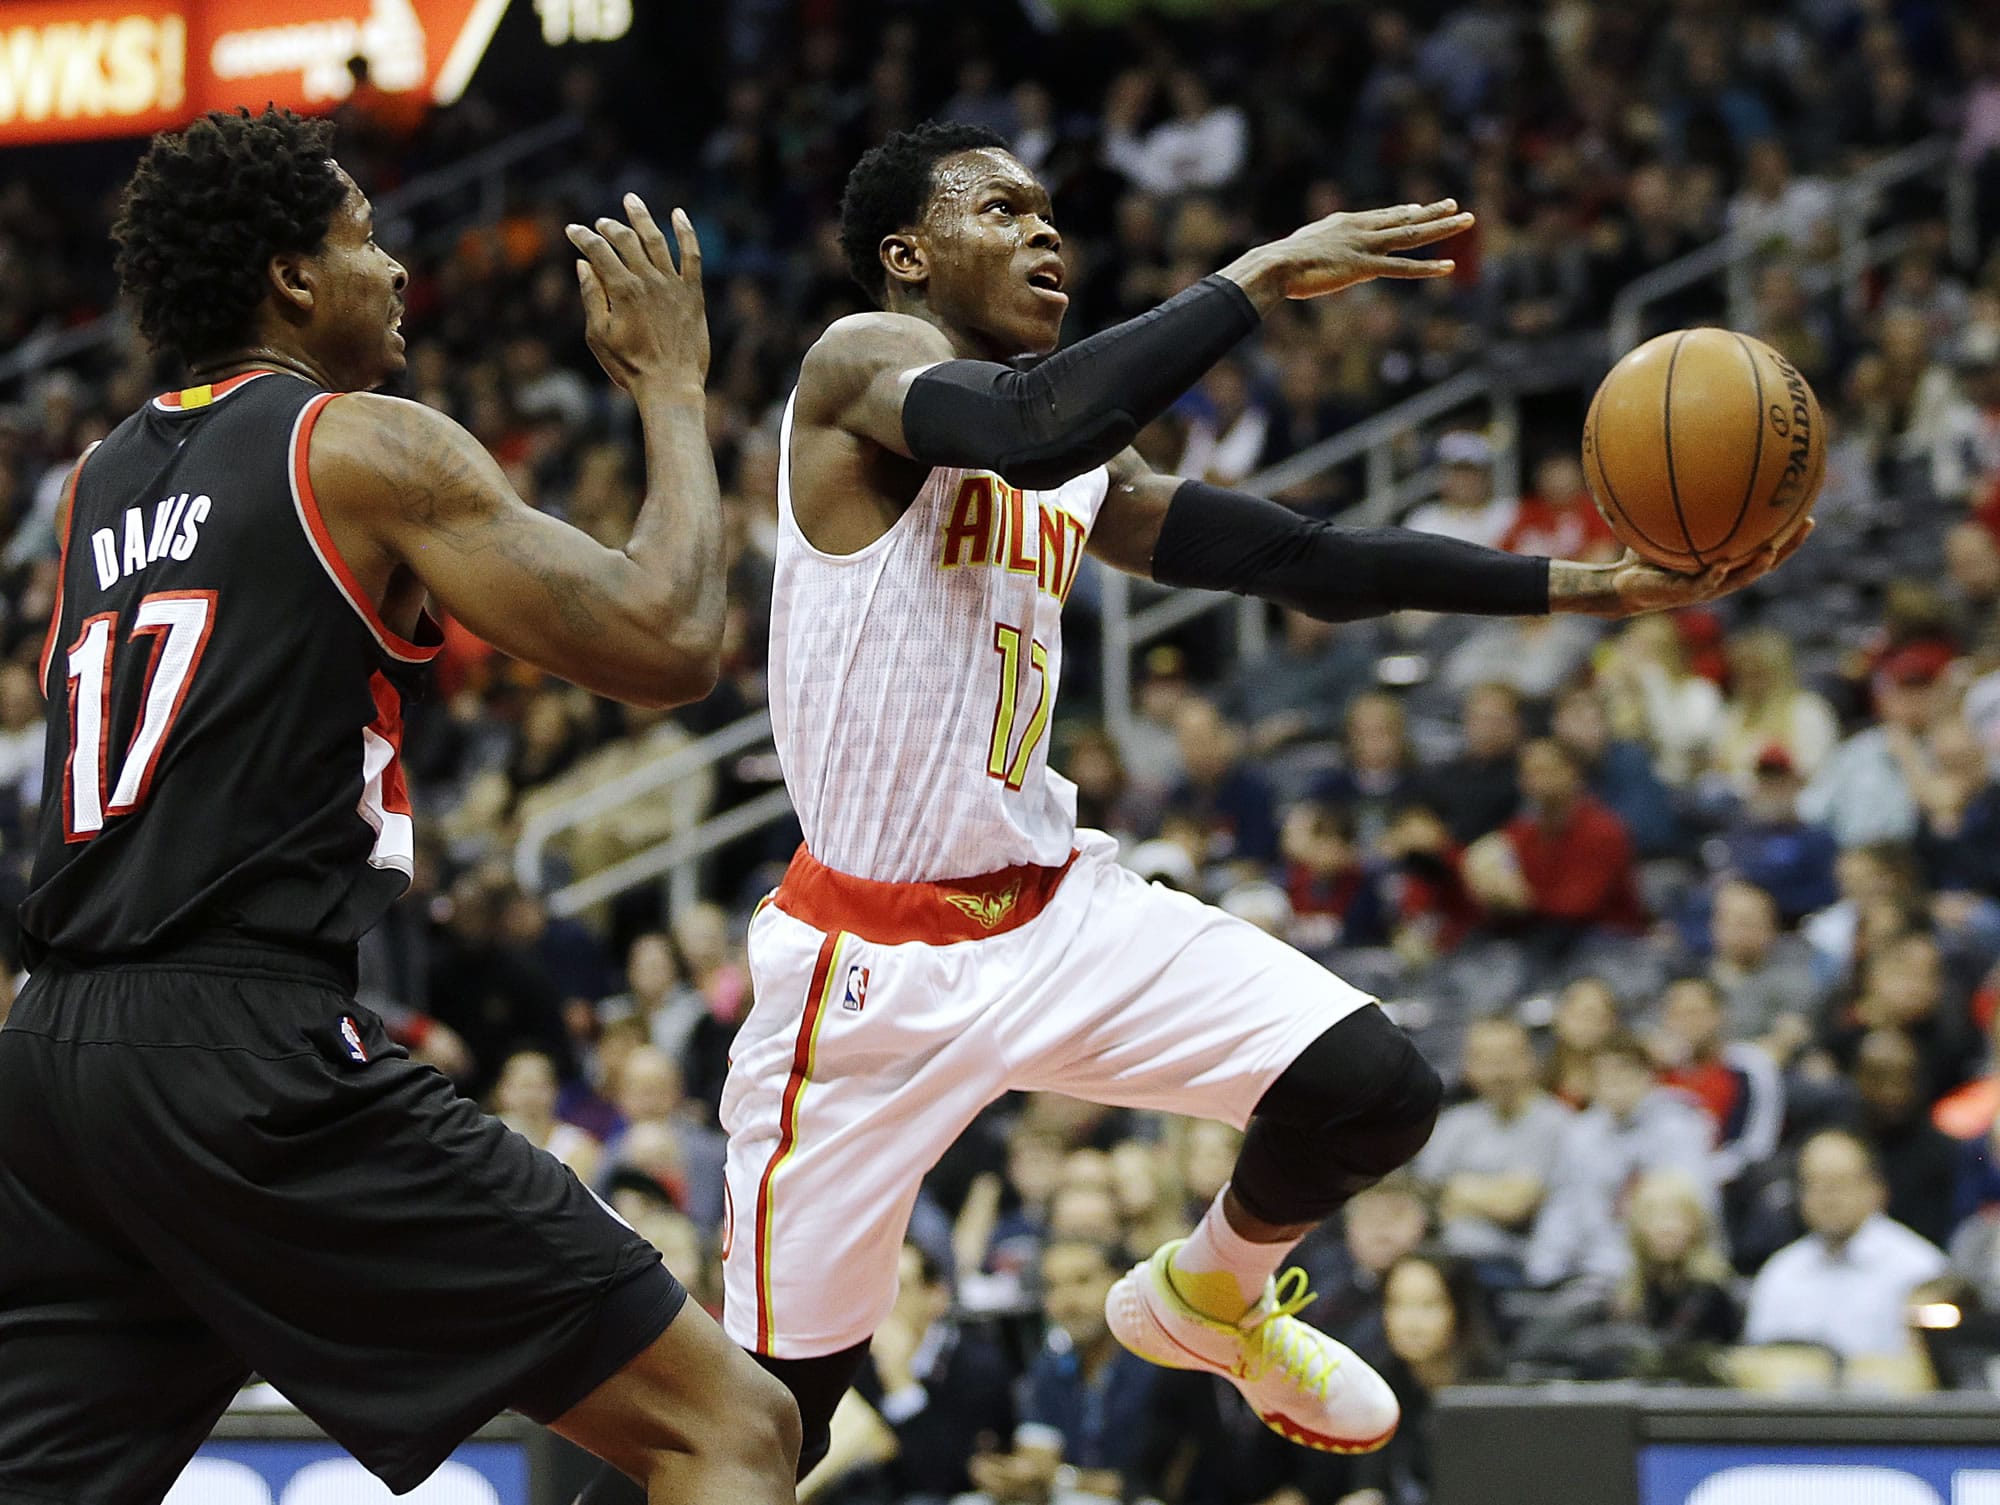 Atlanta Hawks&#039; Dennis Schroder, right, of Germany, put up a shot against Portland Trail Blazers&#039; Ed Davis in the second quarter of an NBA basketball game Monday, Dec. 21, 2015, in Atlanta. The Hawks won 106-97.